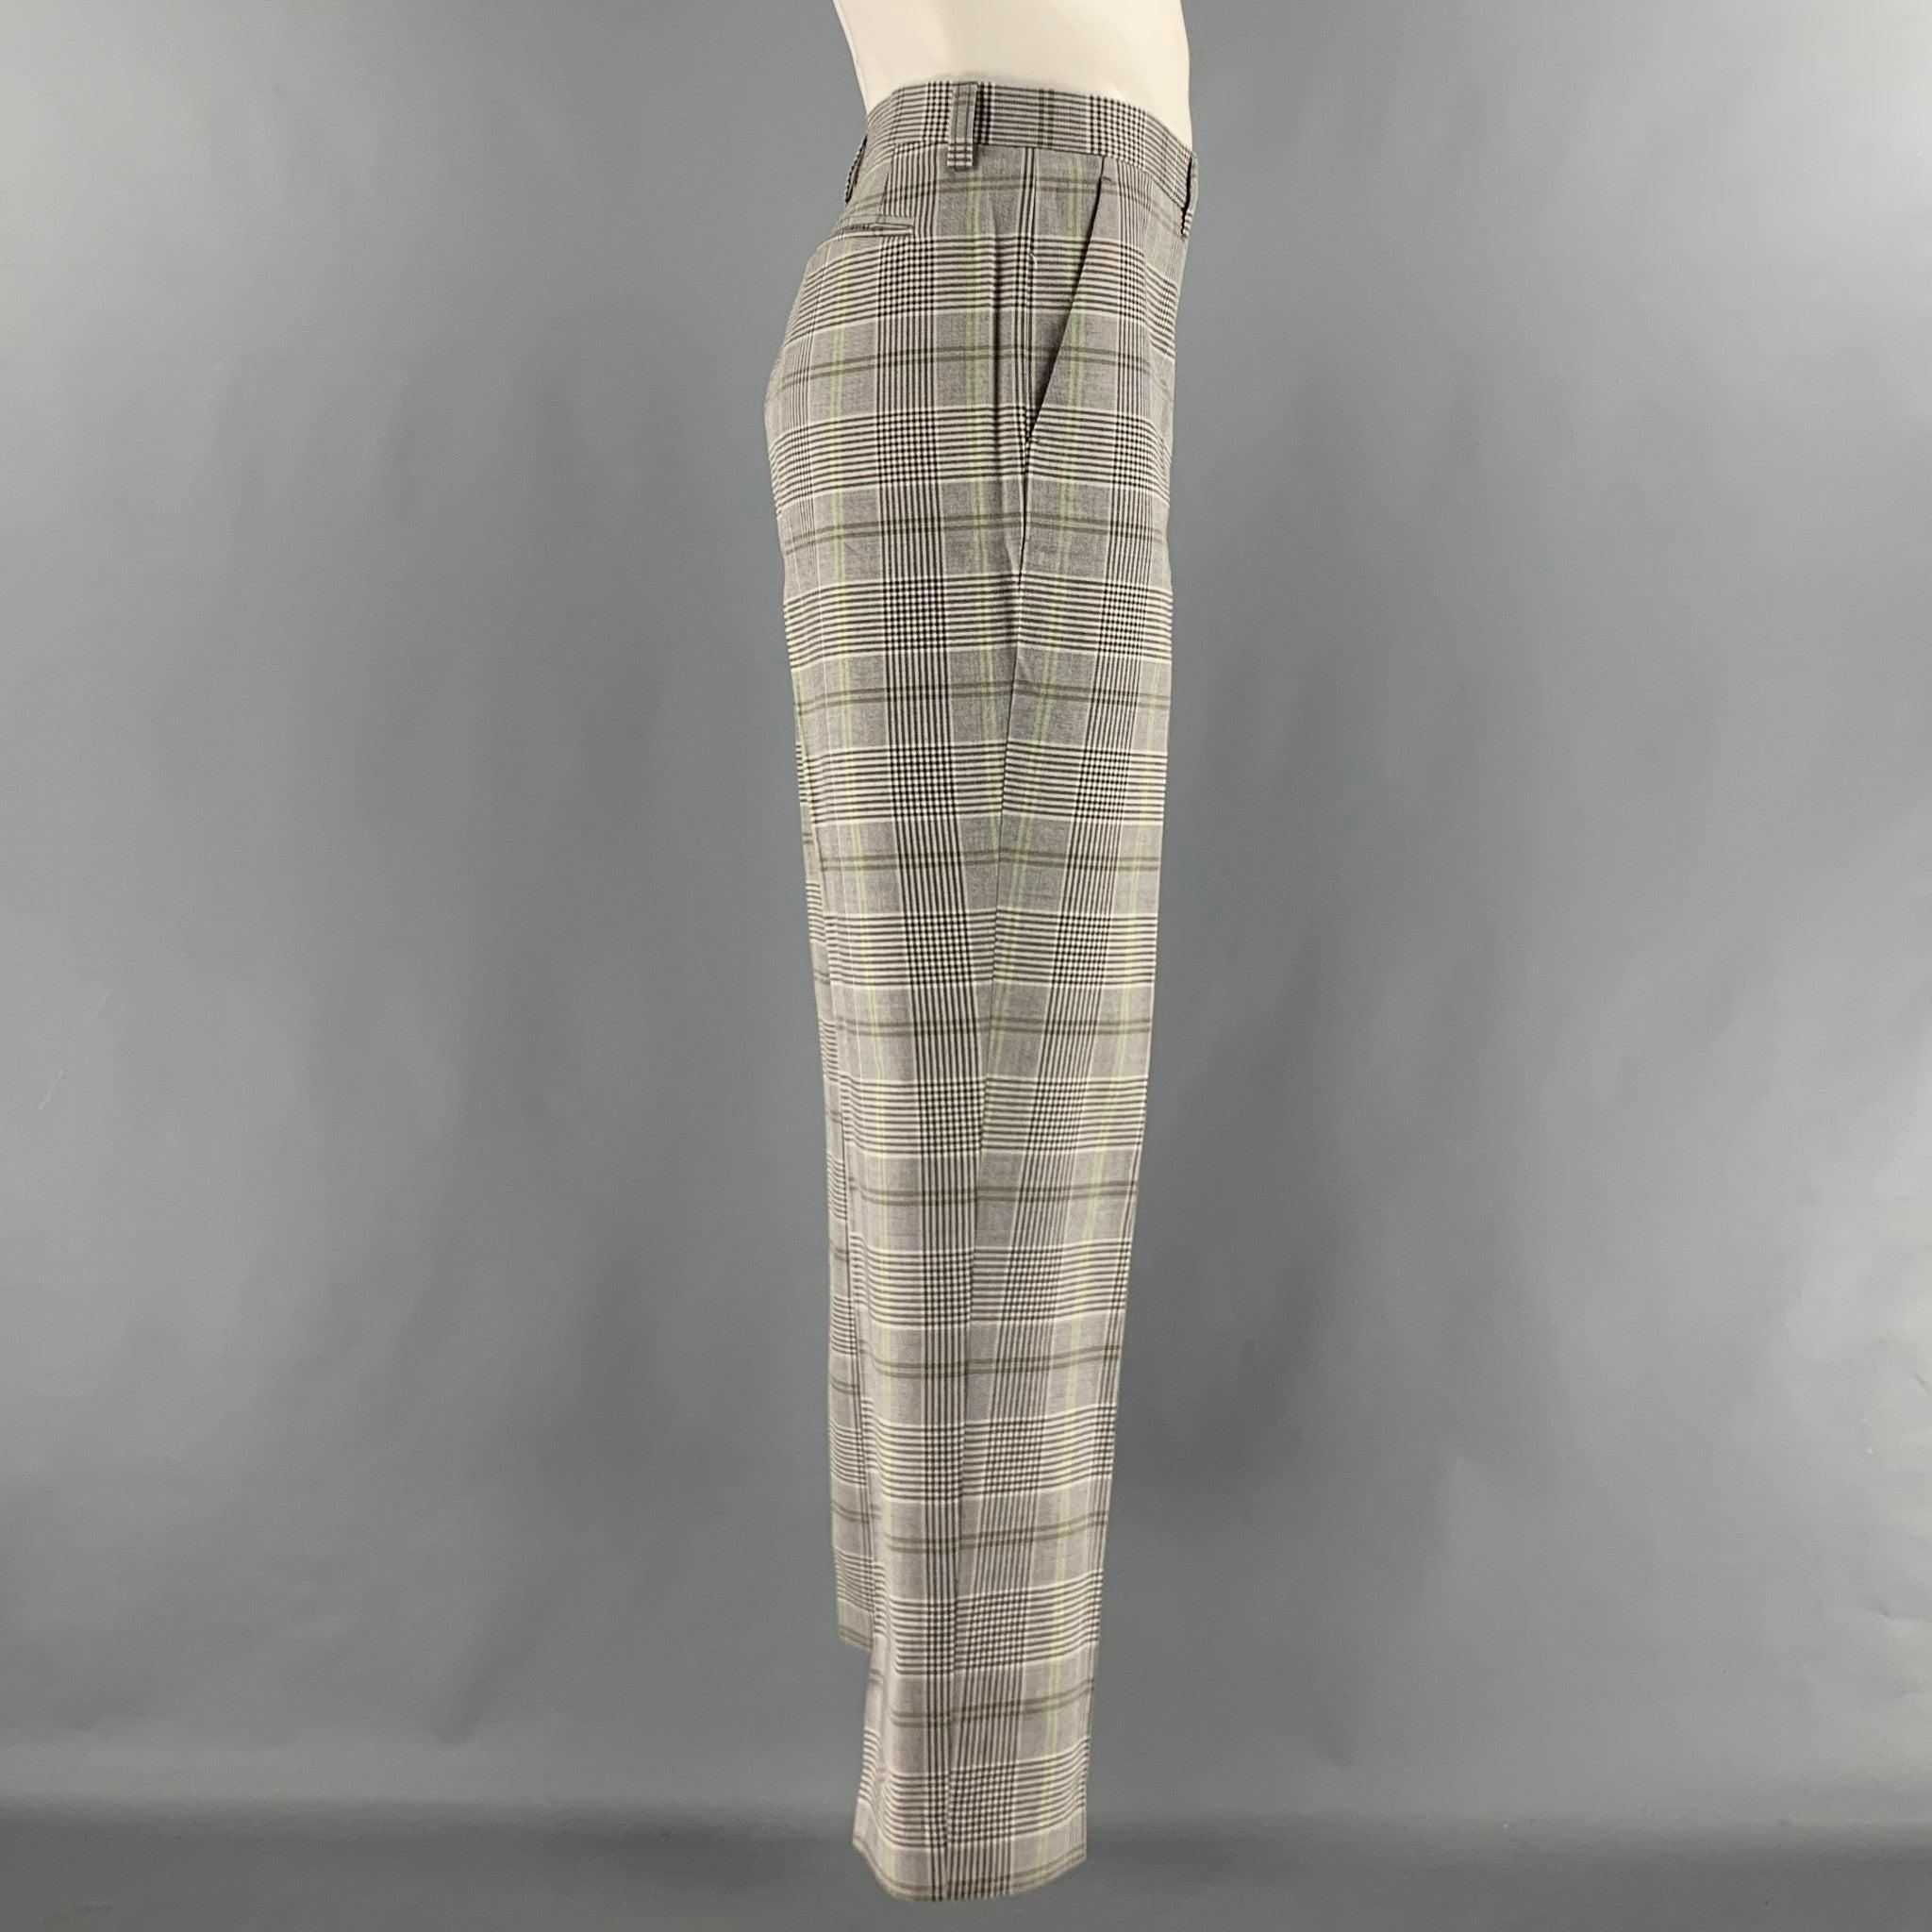 ETRO dress pants comes in a black, white and green plaid wool woven featuring a flat front, regular fit, slit pockets, and a zip fly closure. Made in Italy. Very Good Pre-Owned Condition. 

Marked:   52 

Measurements: 
  Waist: 36 inches Rise: 9.5